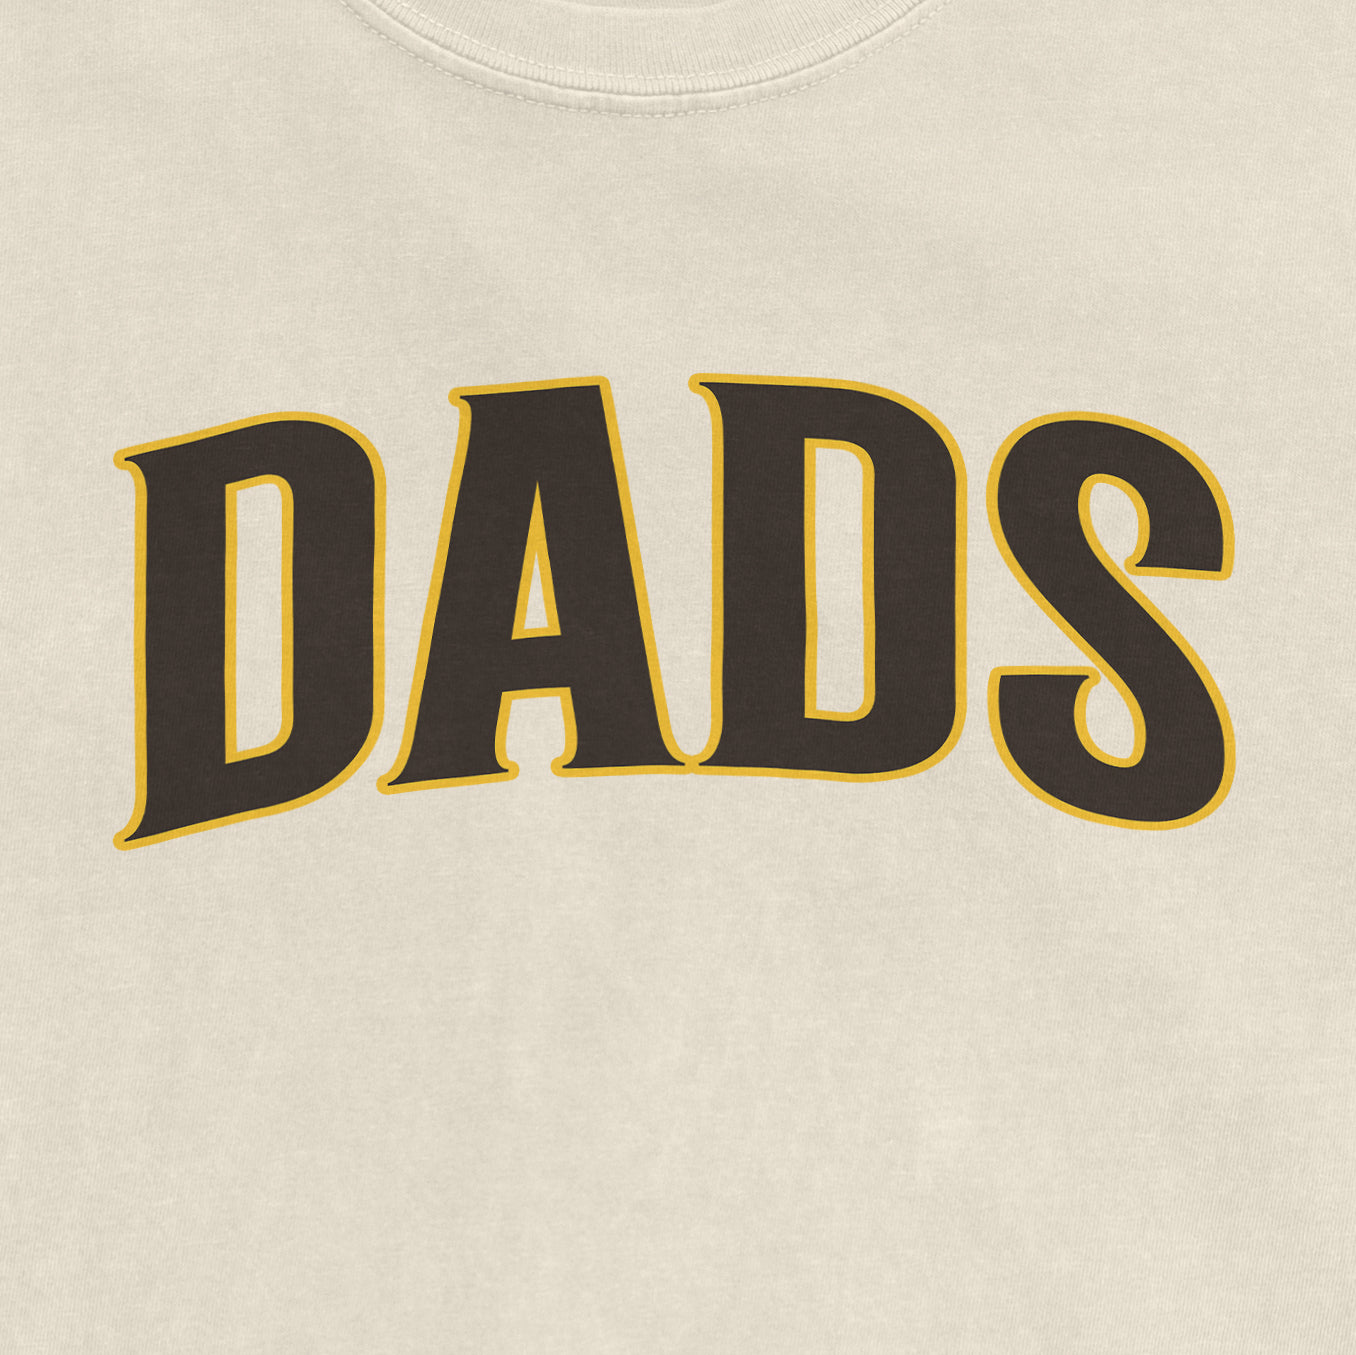 SD DADS | Comfort Colors vintage tee